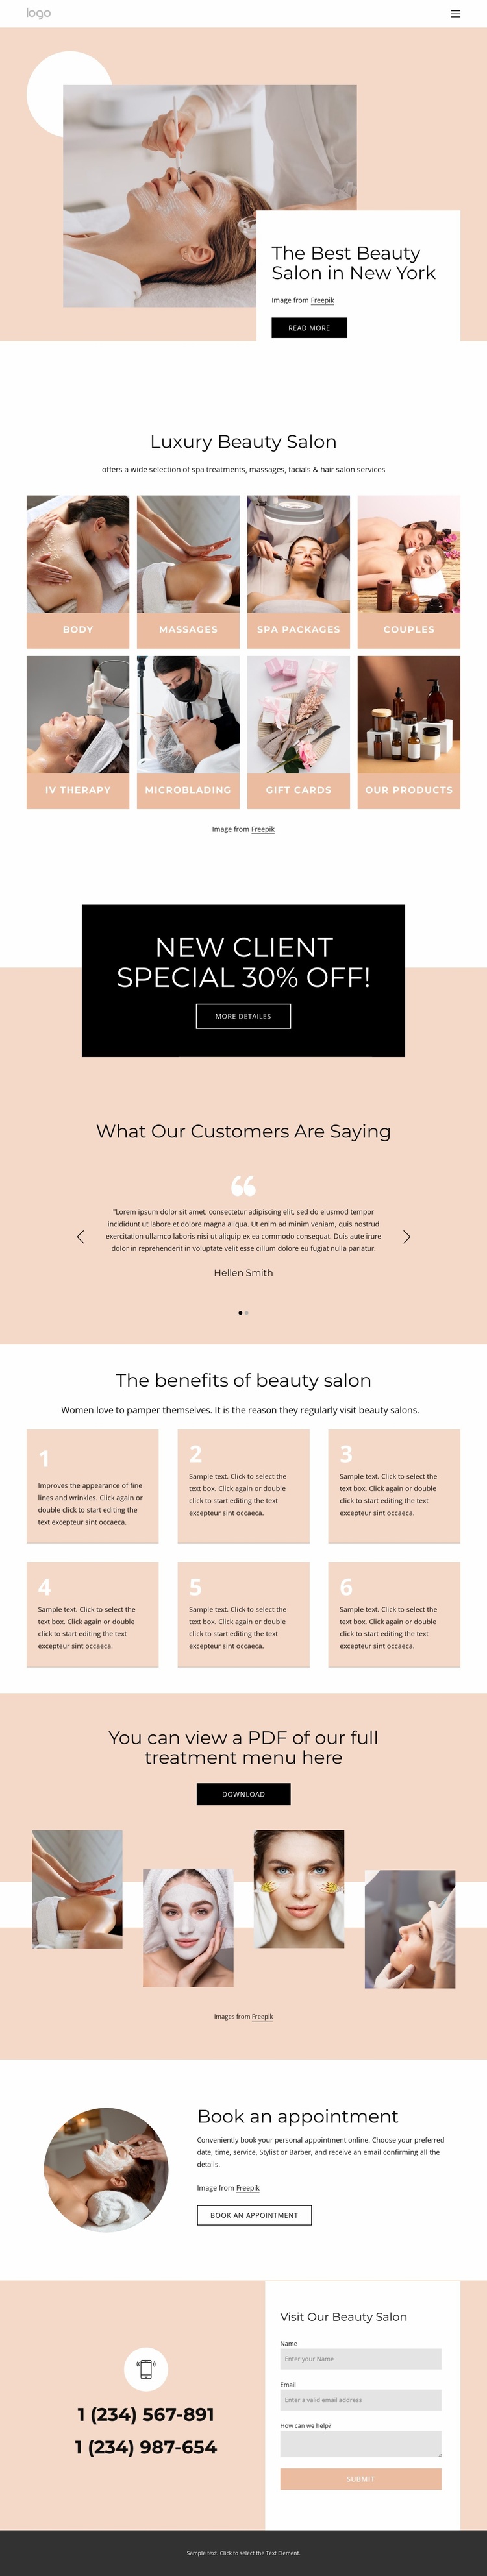 The best beauty salon in NYC Ecommerce Website Design